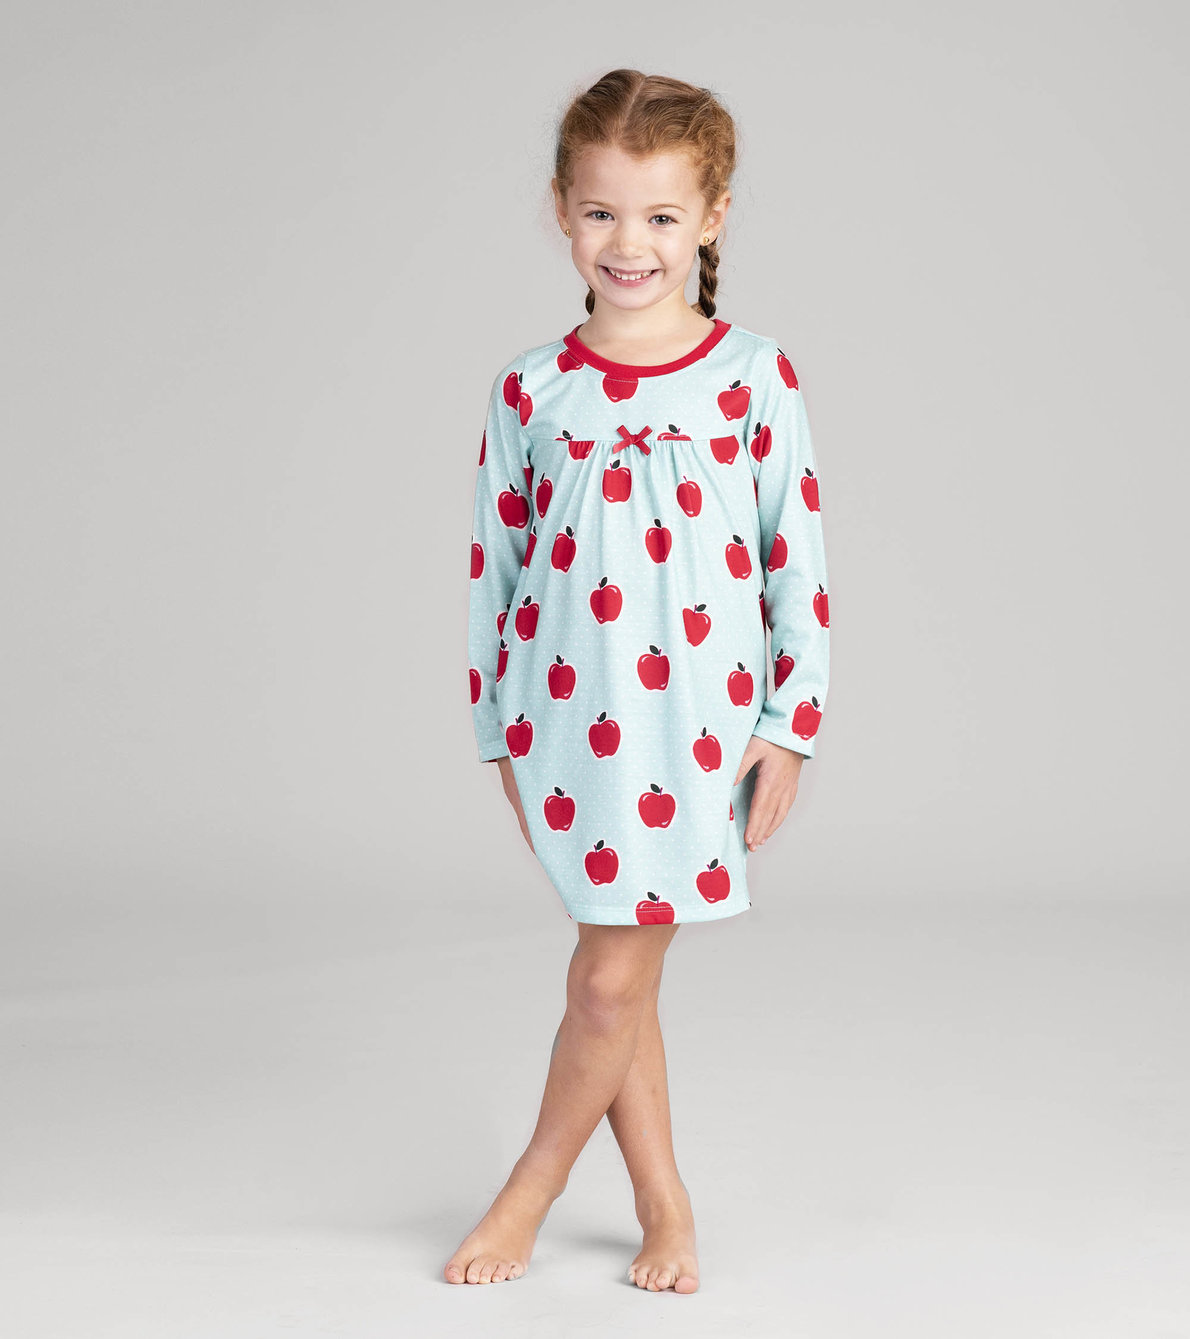 View larger image of Apples and Dots Nightdress